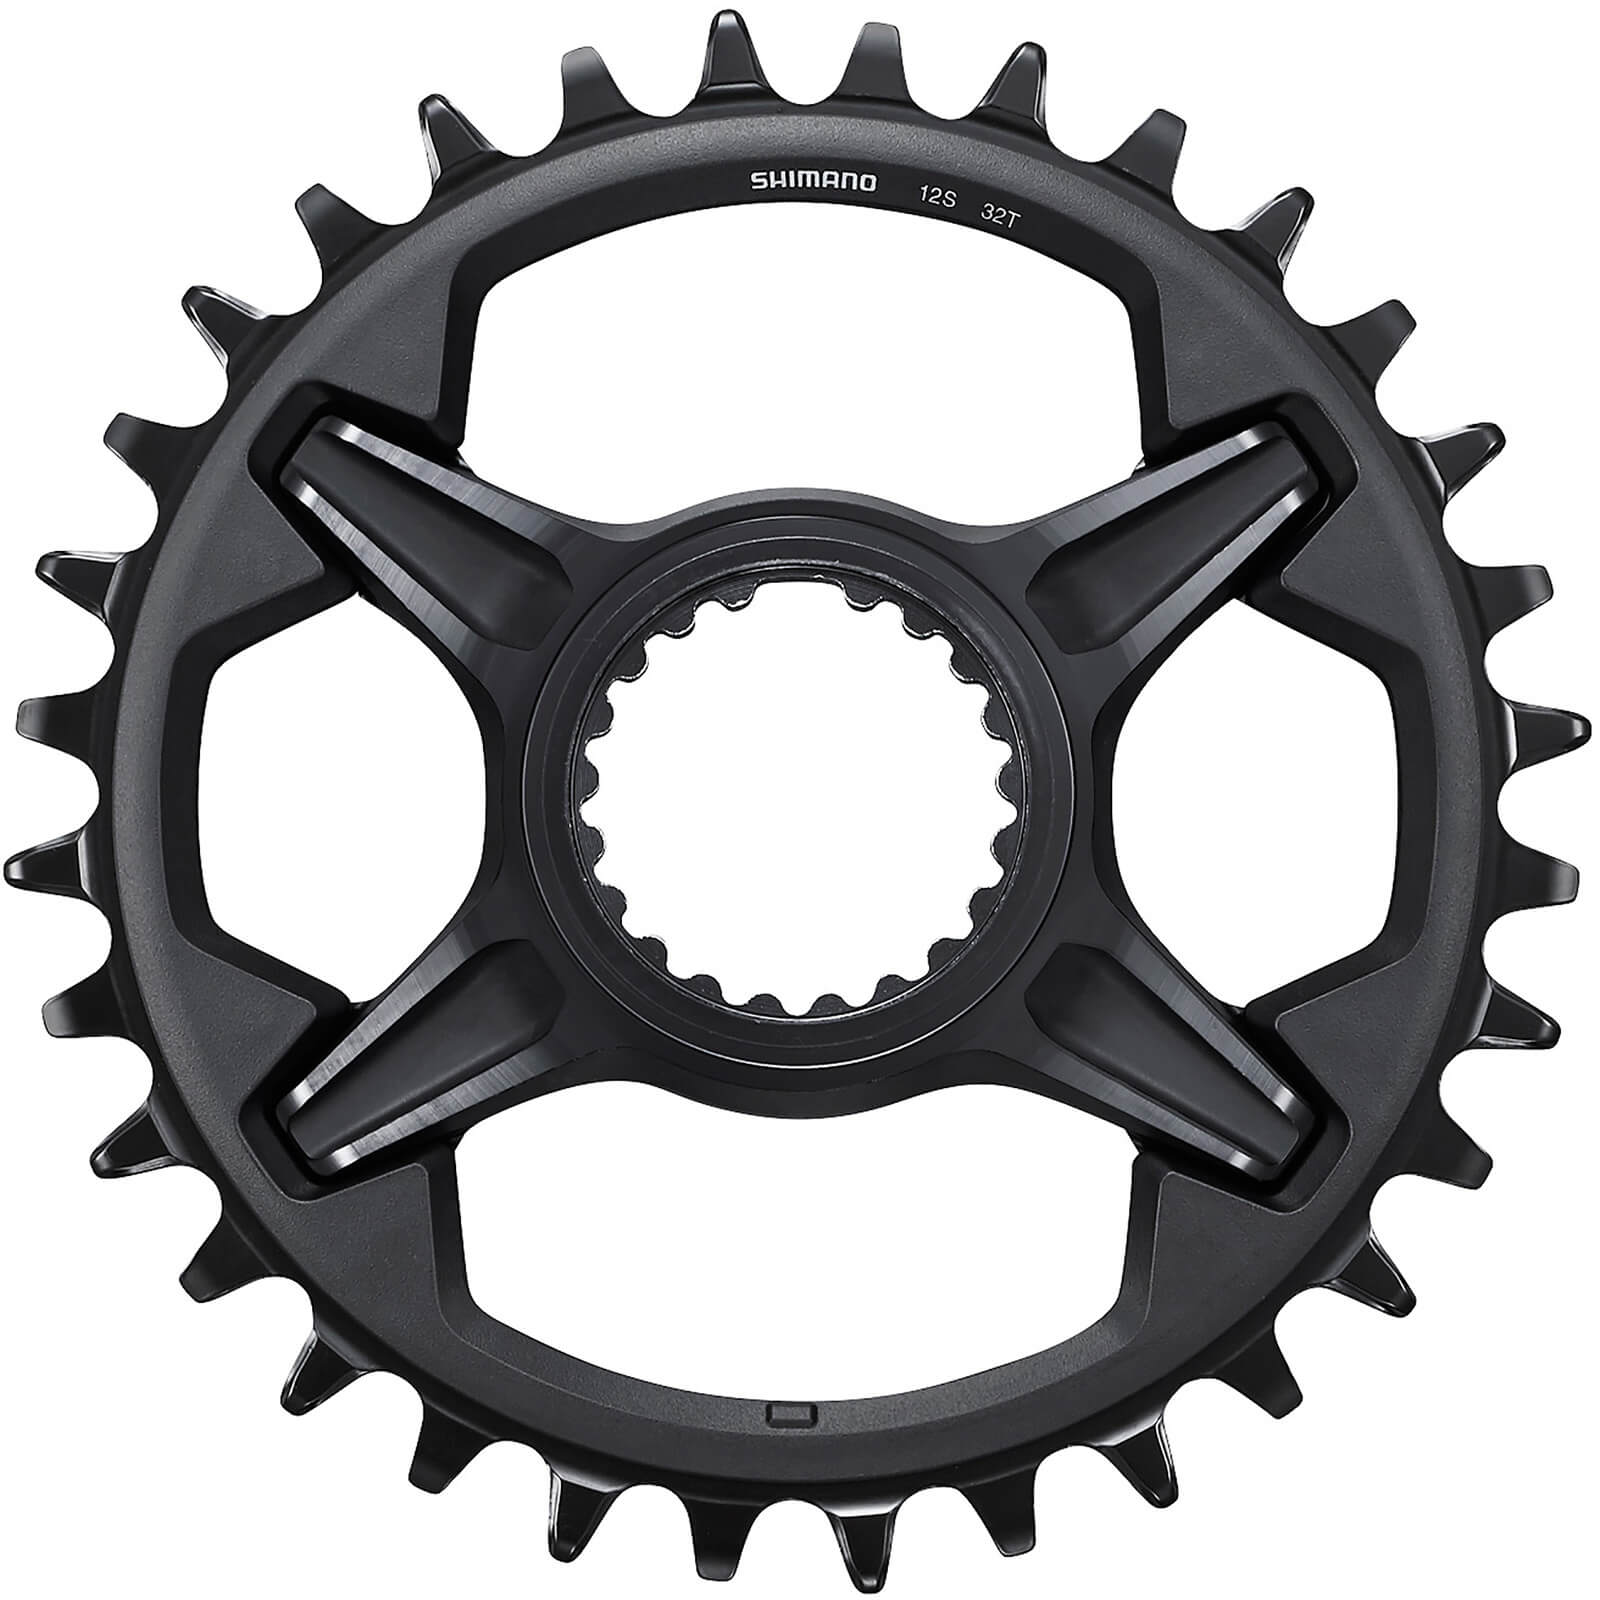 Shimano Deore XT M8100/M8130 Single Chainring - 12 Speed - 32T